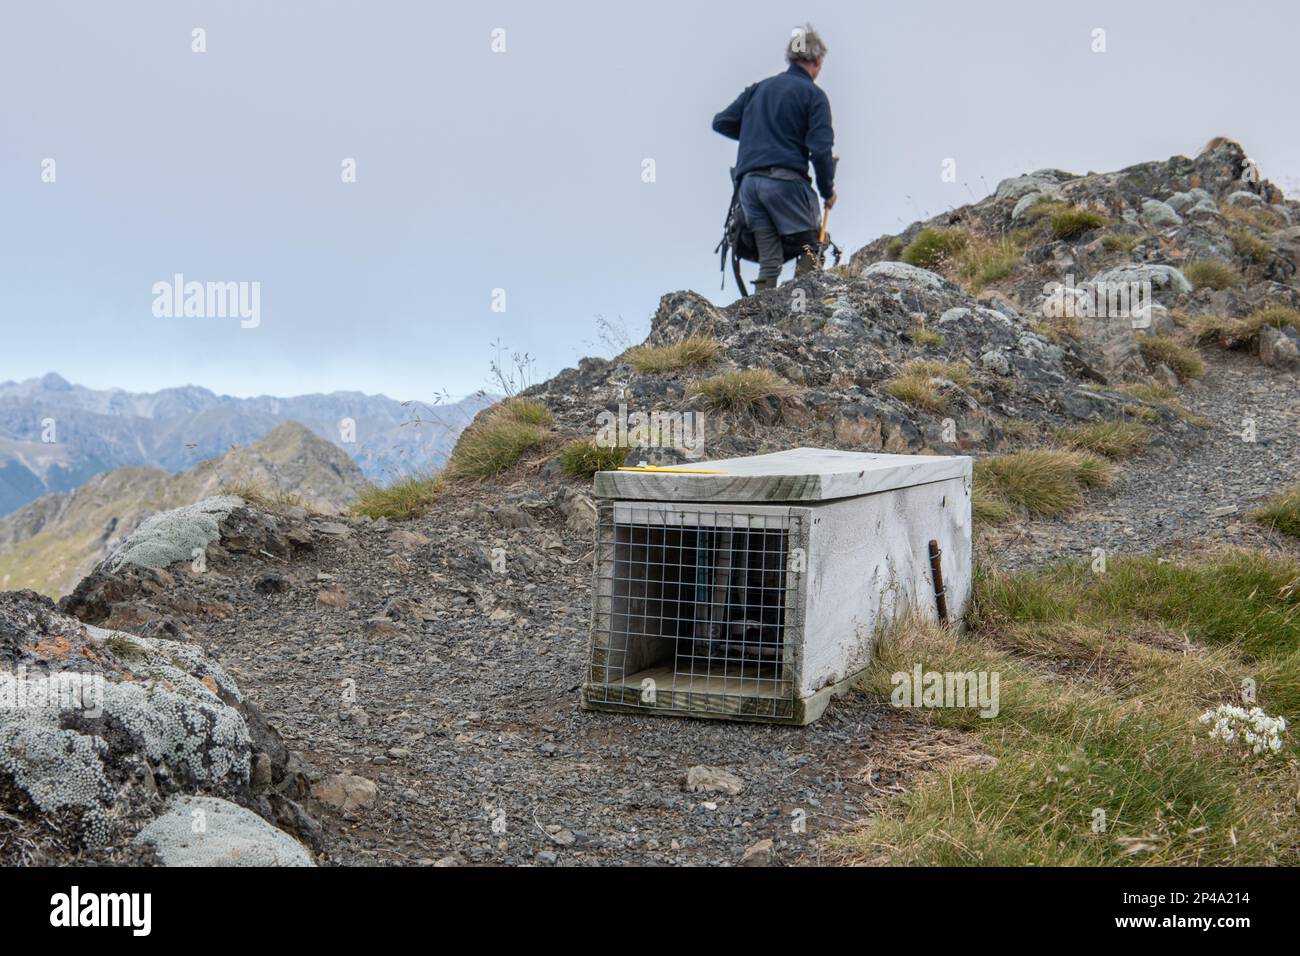 A trap meant for predator eradication in the wilderness of Aotearoa New Zealand, the country plans to eradicate nonnative predators. Stock Photo